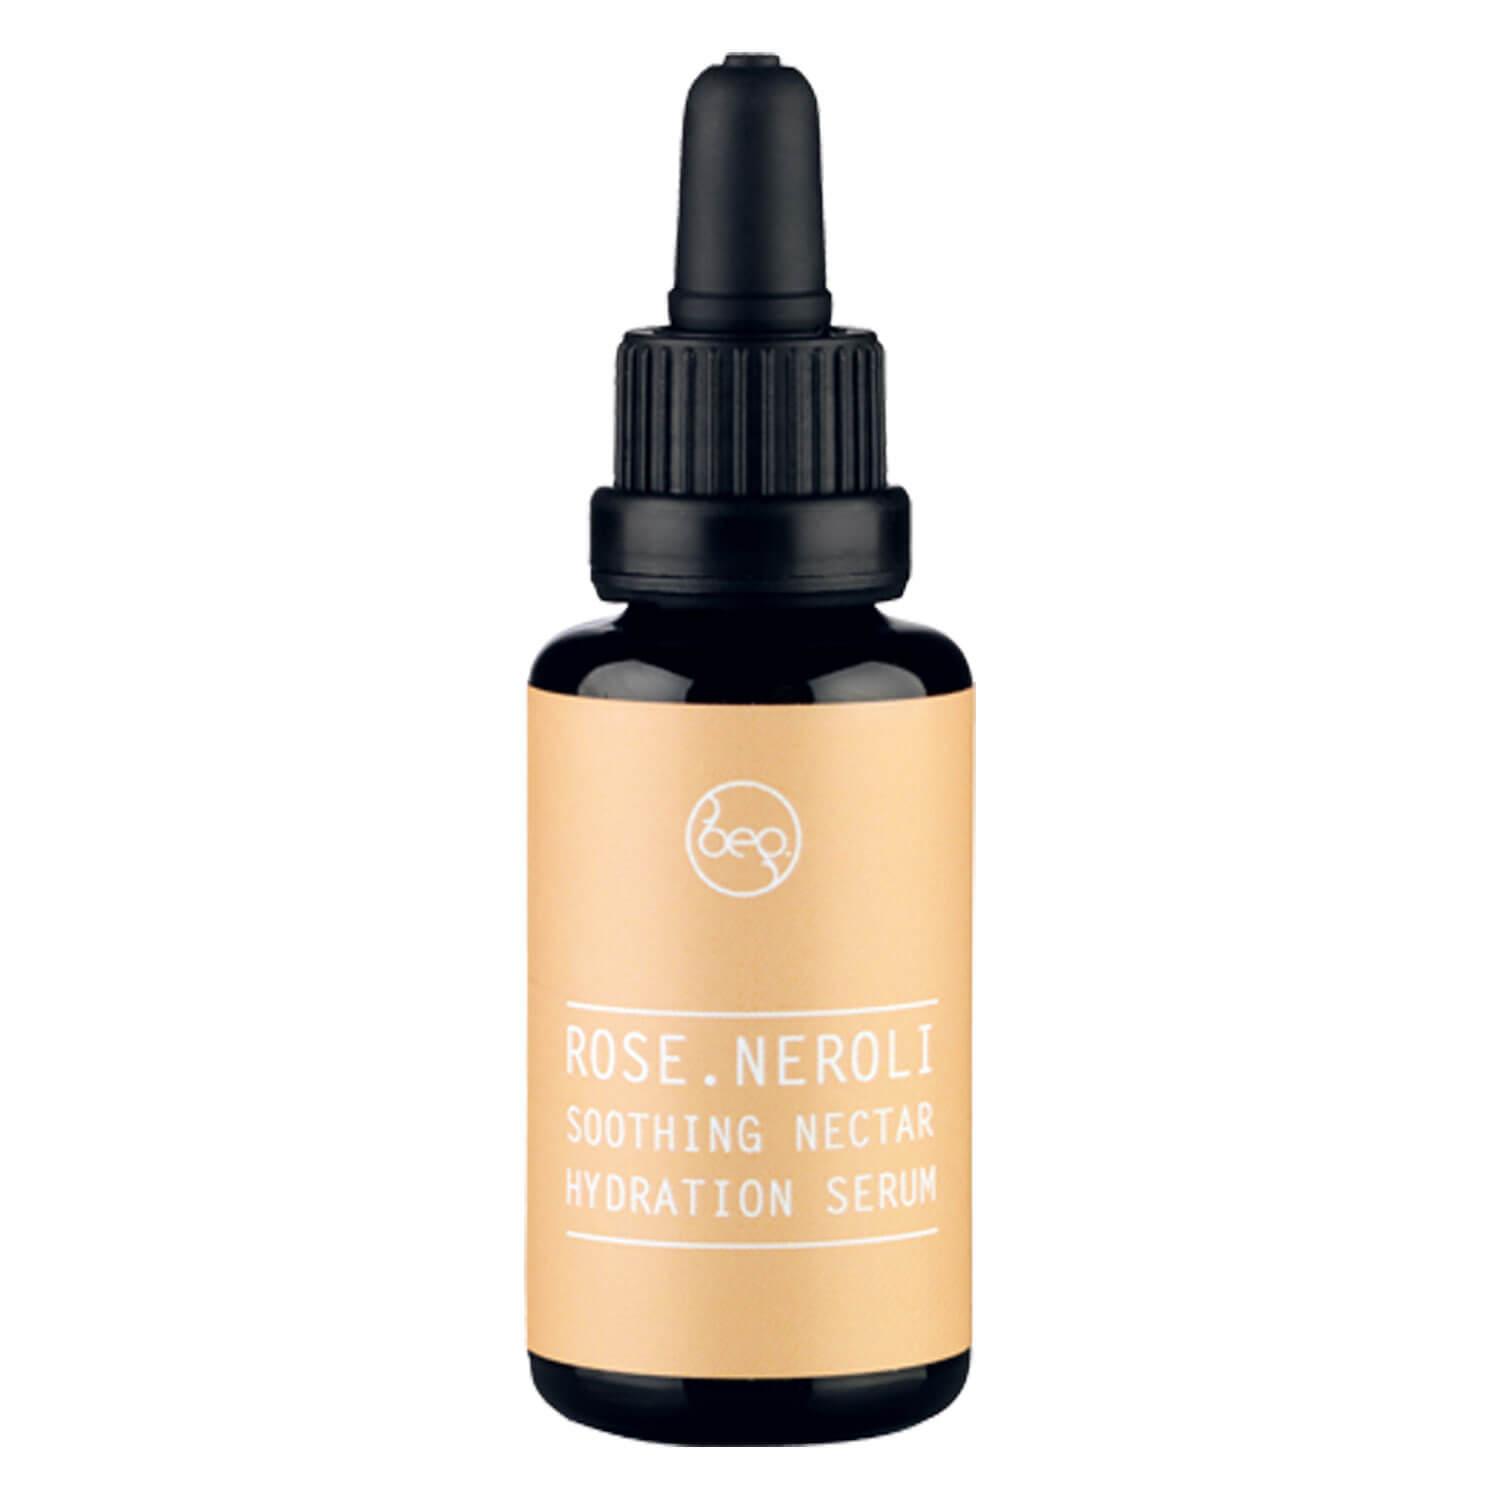 bepure - Face Oil SOOTHING NECTAR Hydration Serum